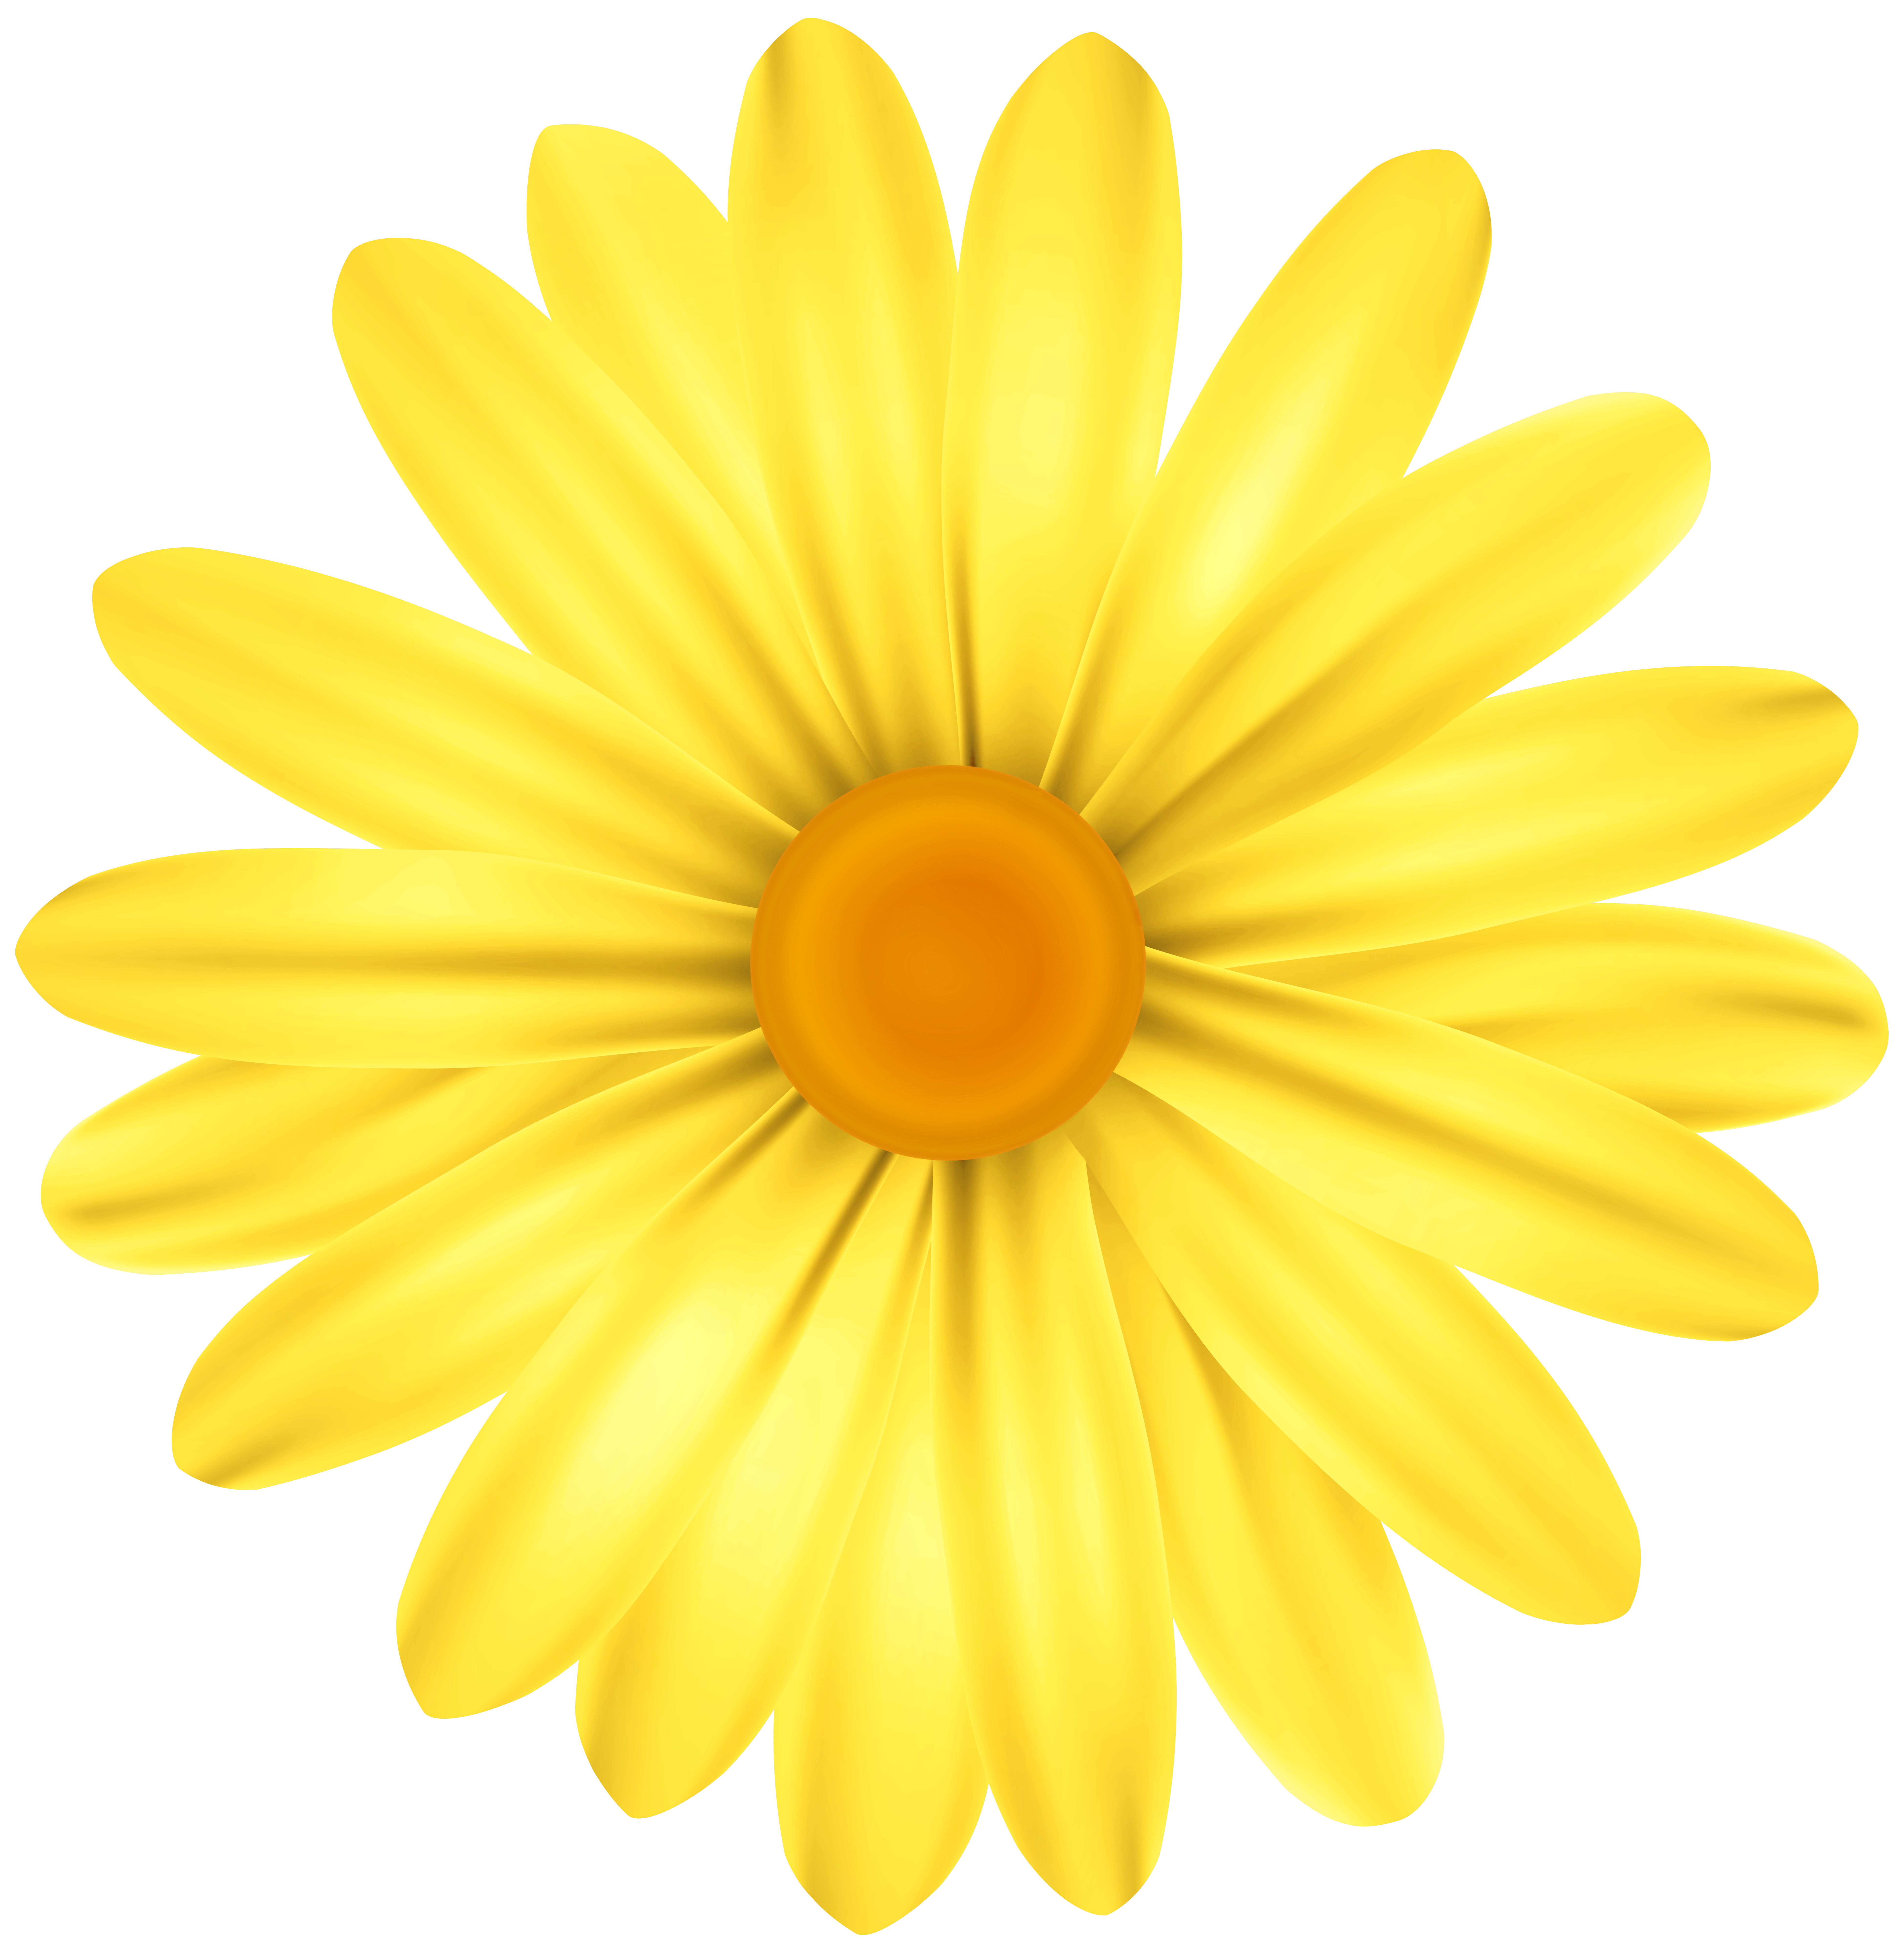 yellow daisy png